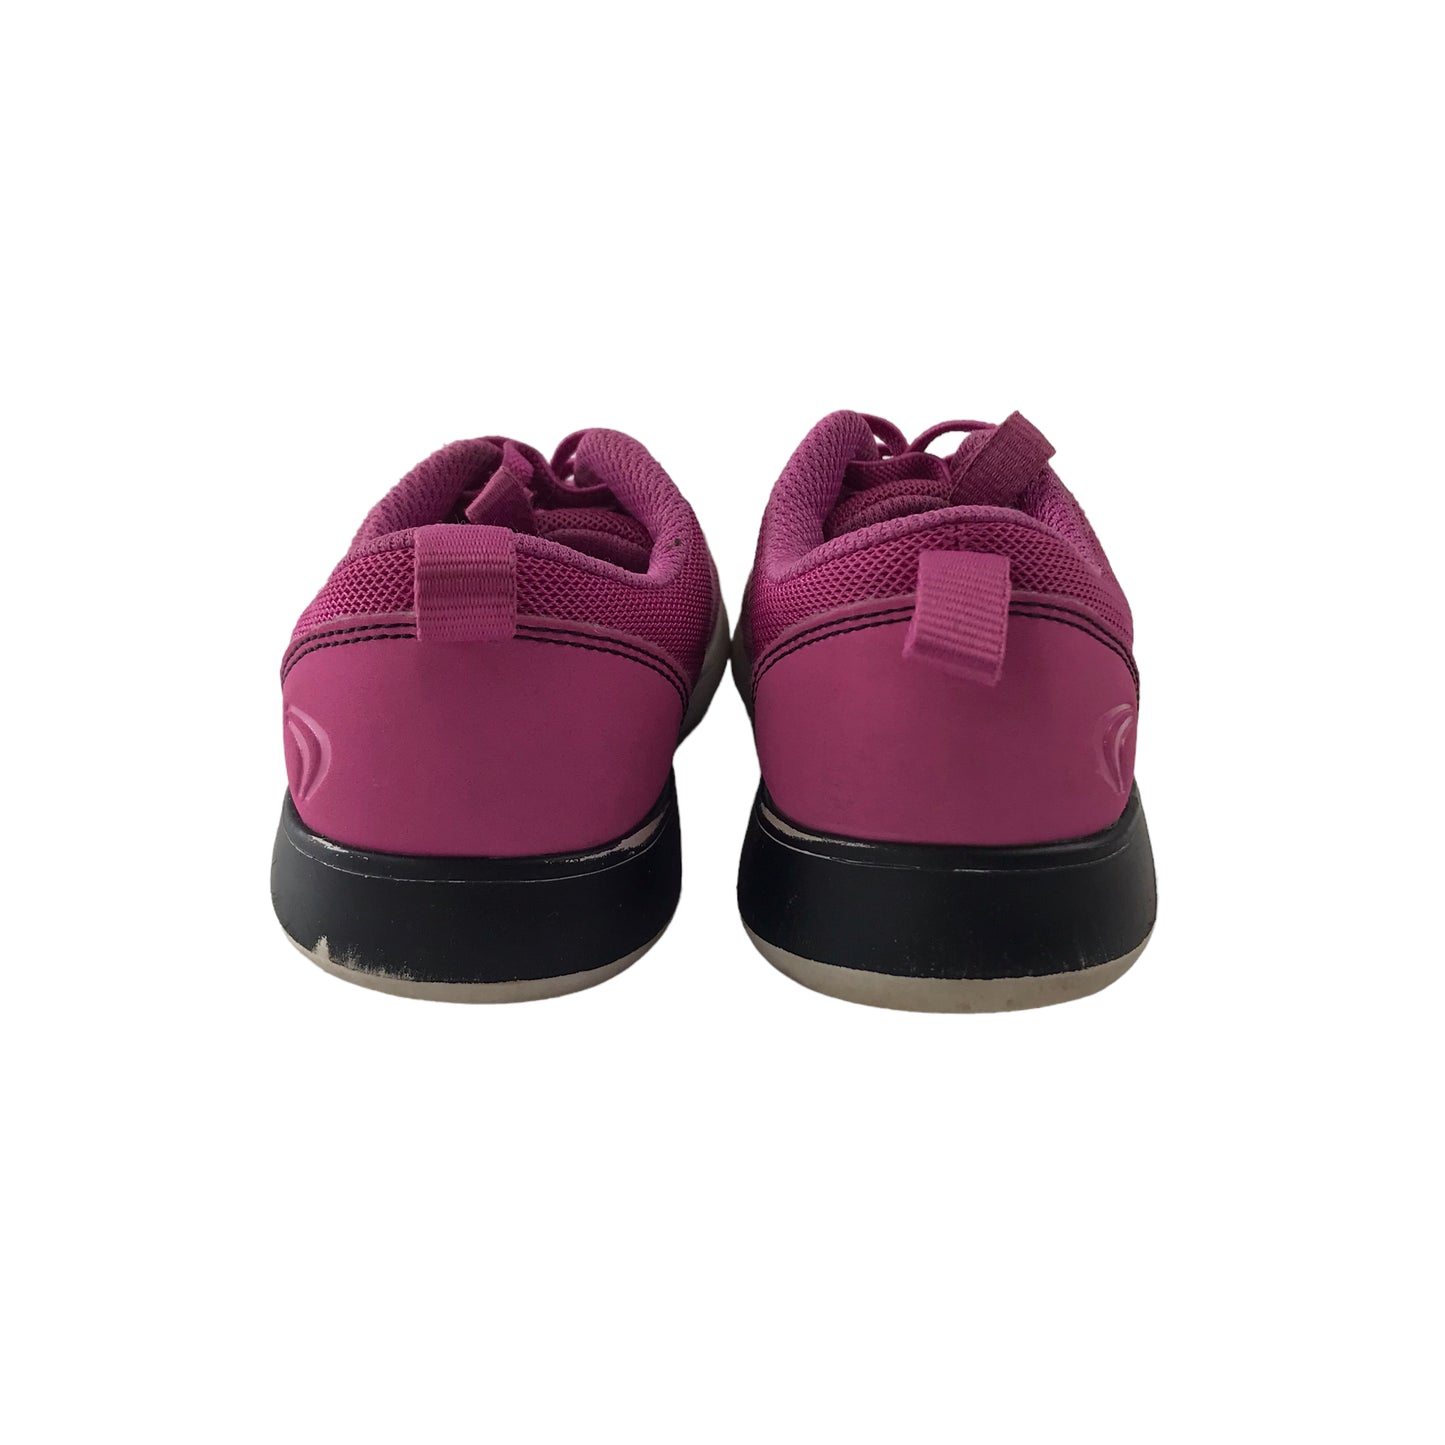 Clarks Trainers Shoe Size 12.5 Junior Pink with Laces